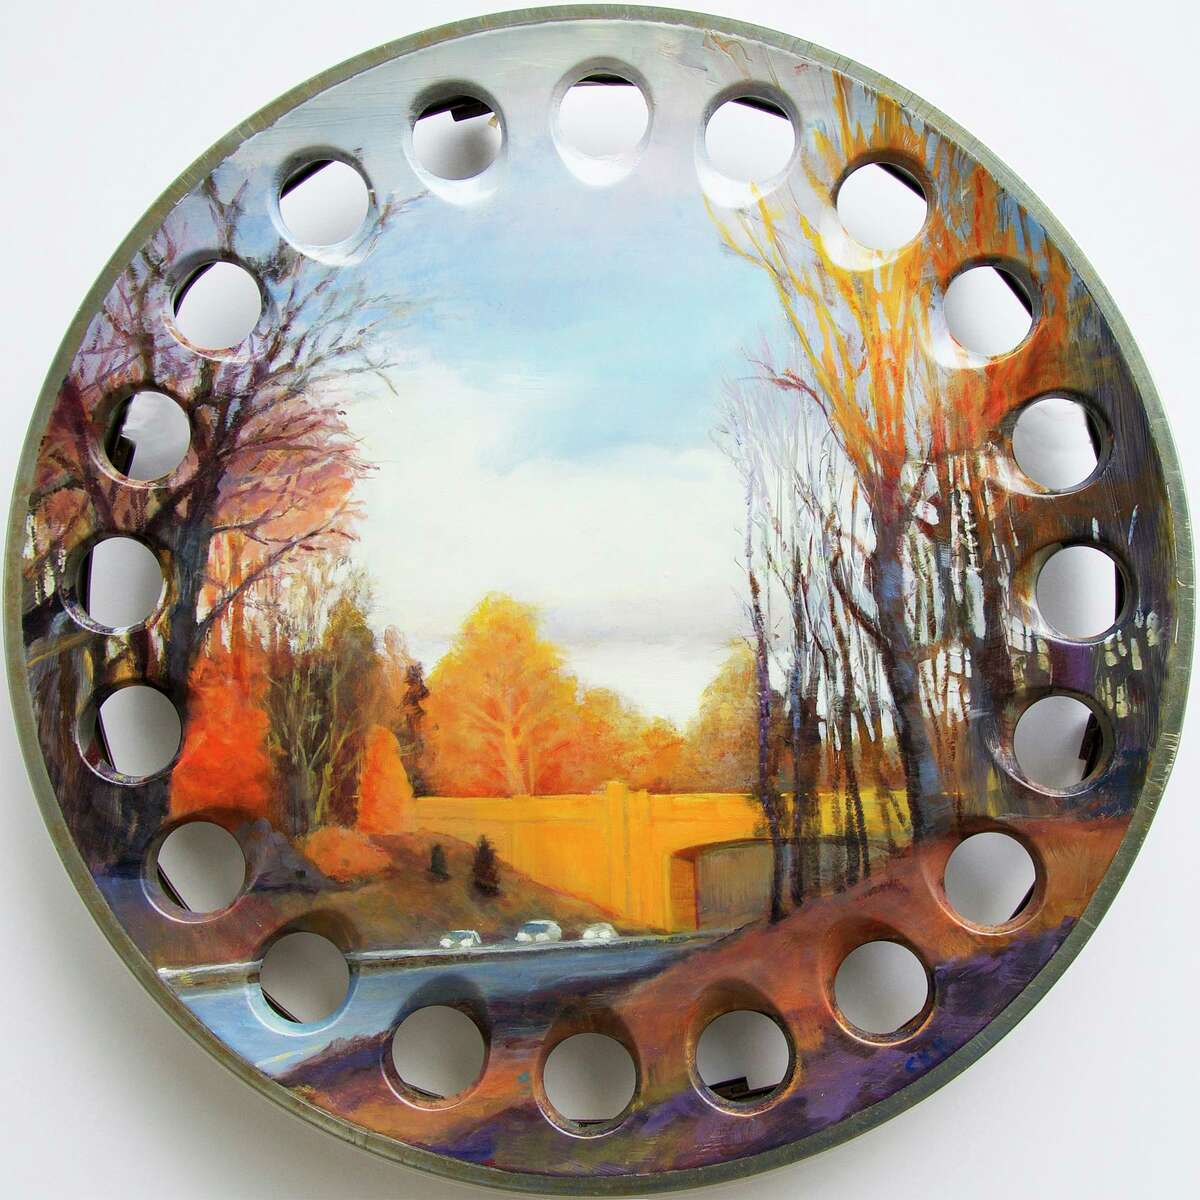 The Travelers, an oil on stainless steel hubcap, by Cynthia Mullins.